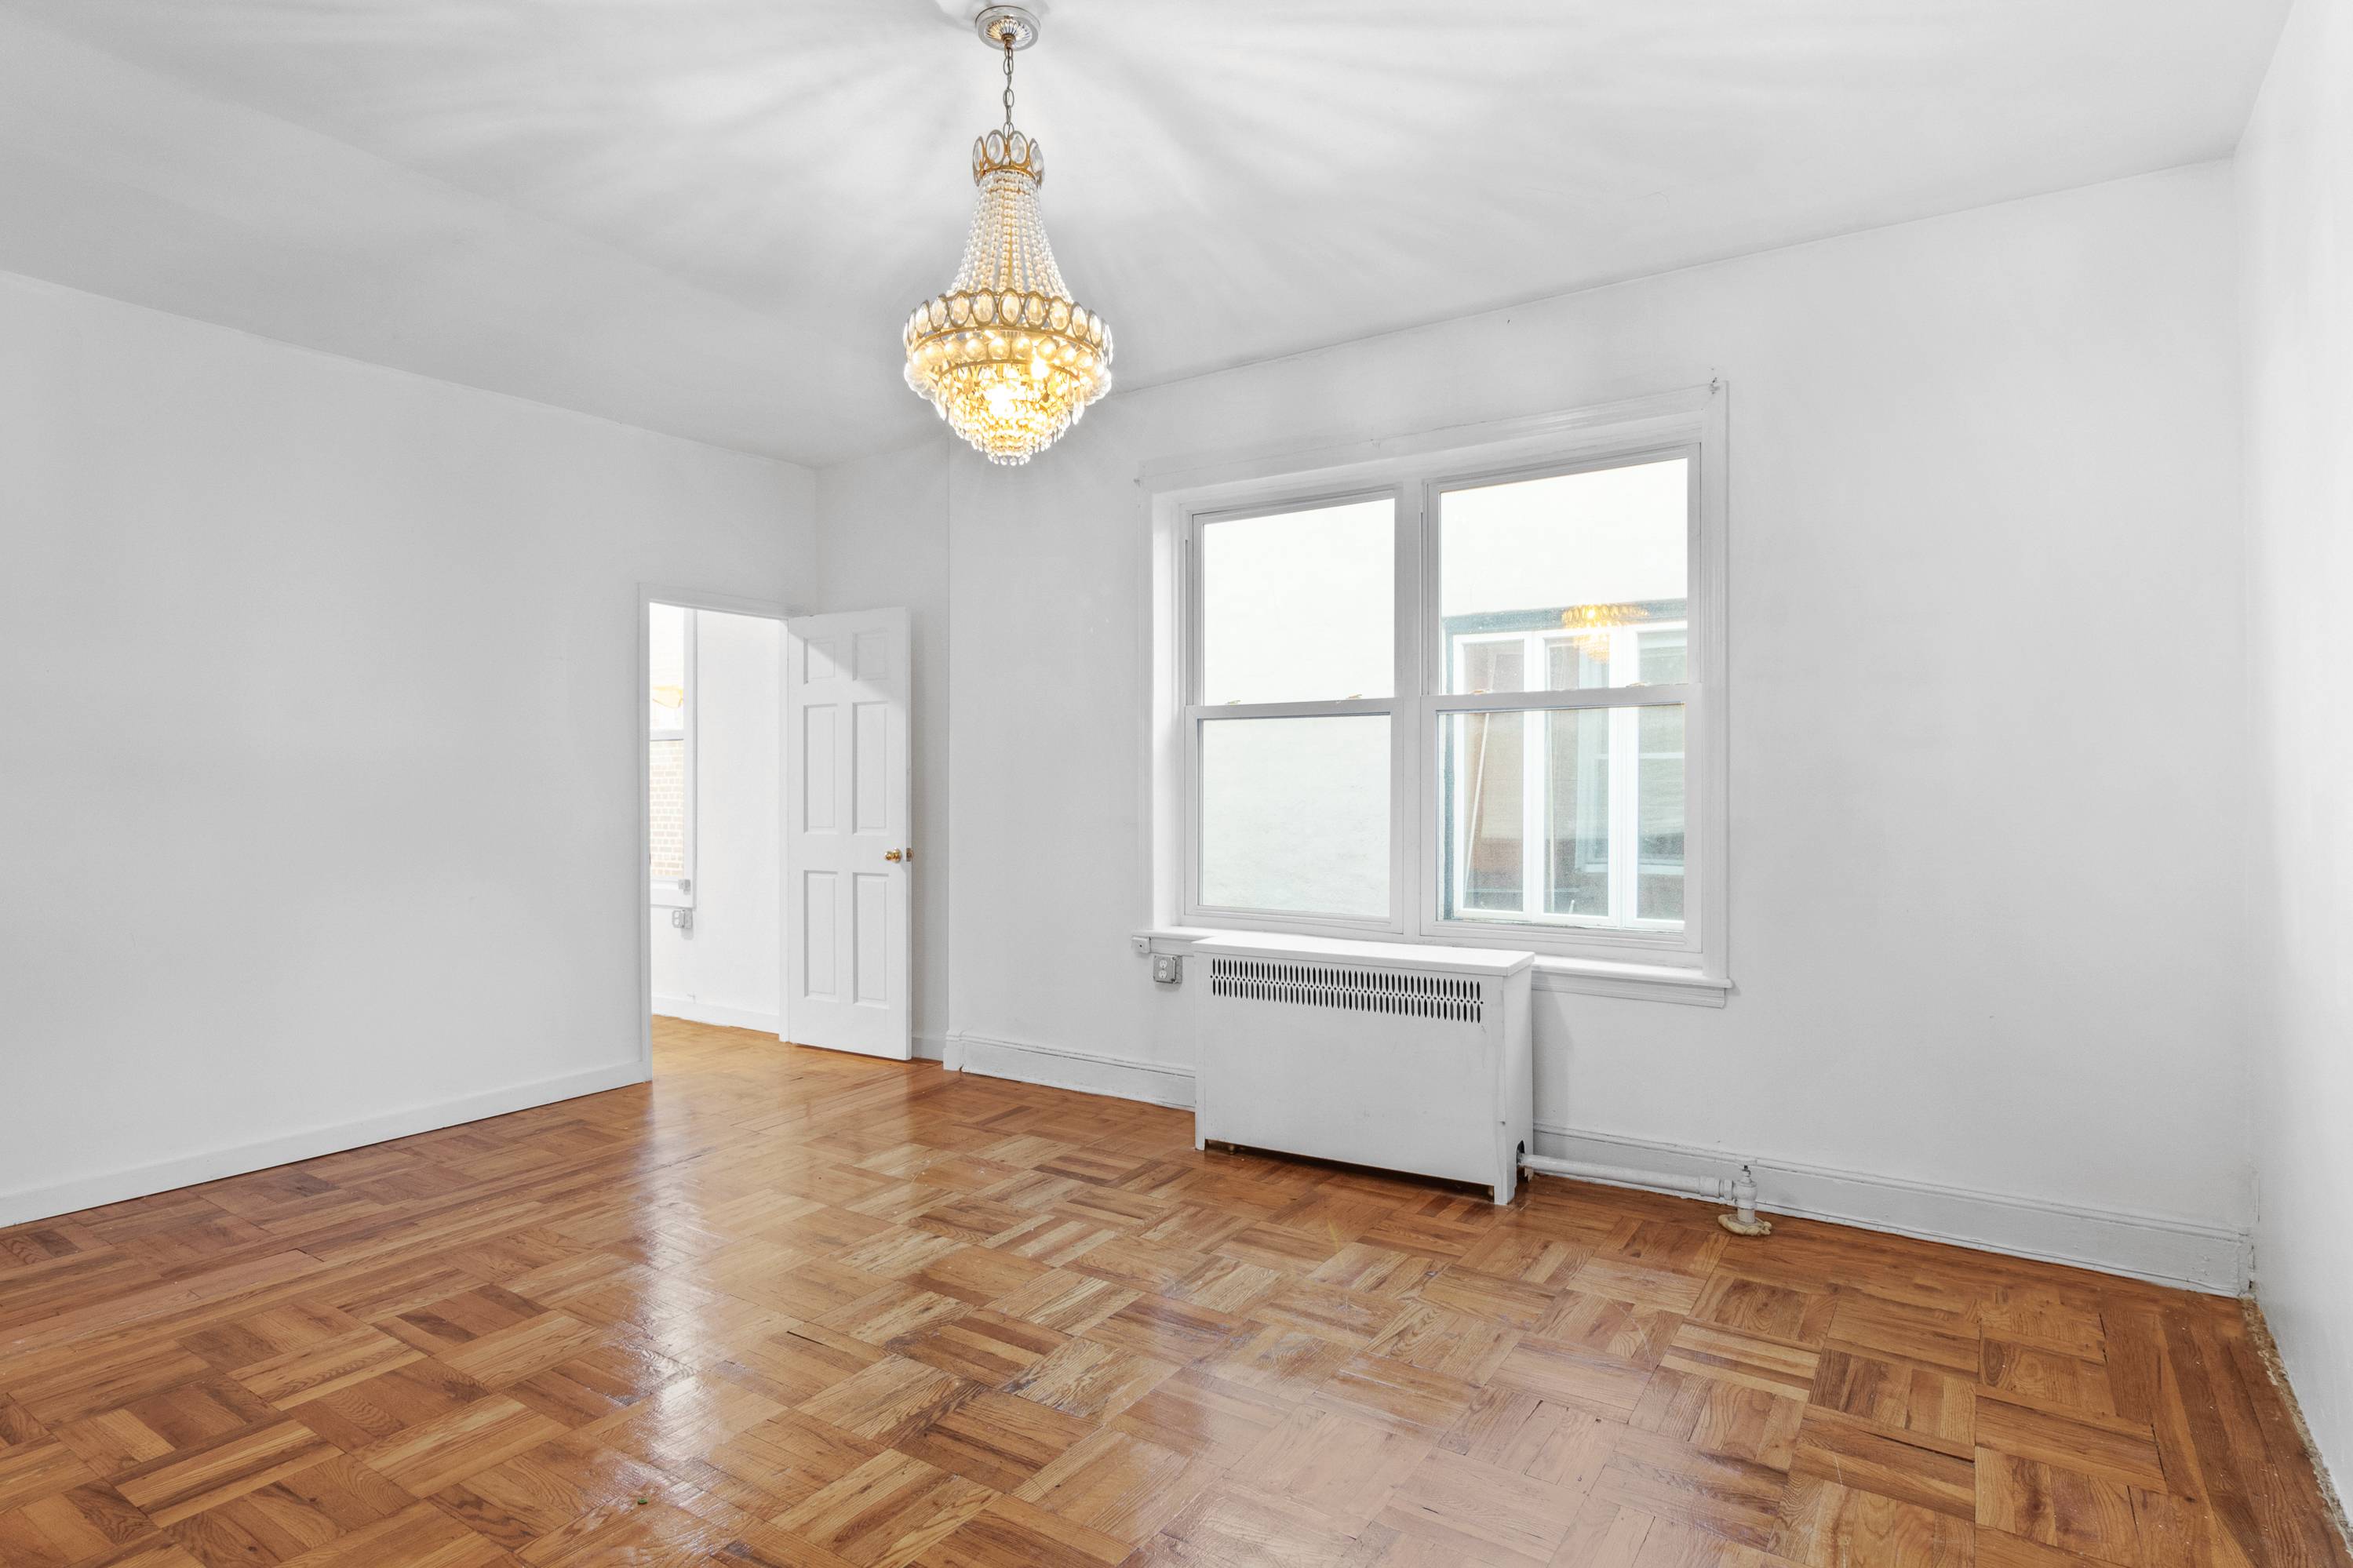 Spacious and Sunny Four Bedroom Flatbush Apartment Available Now!